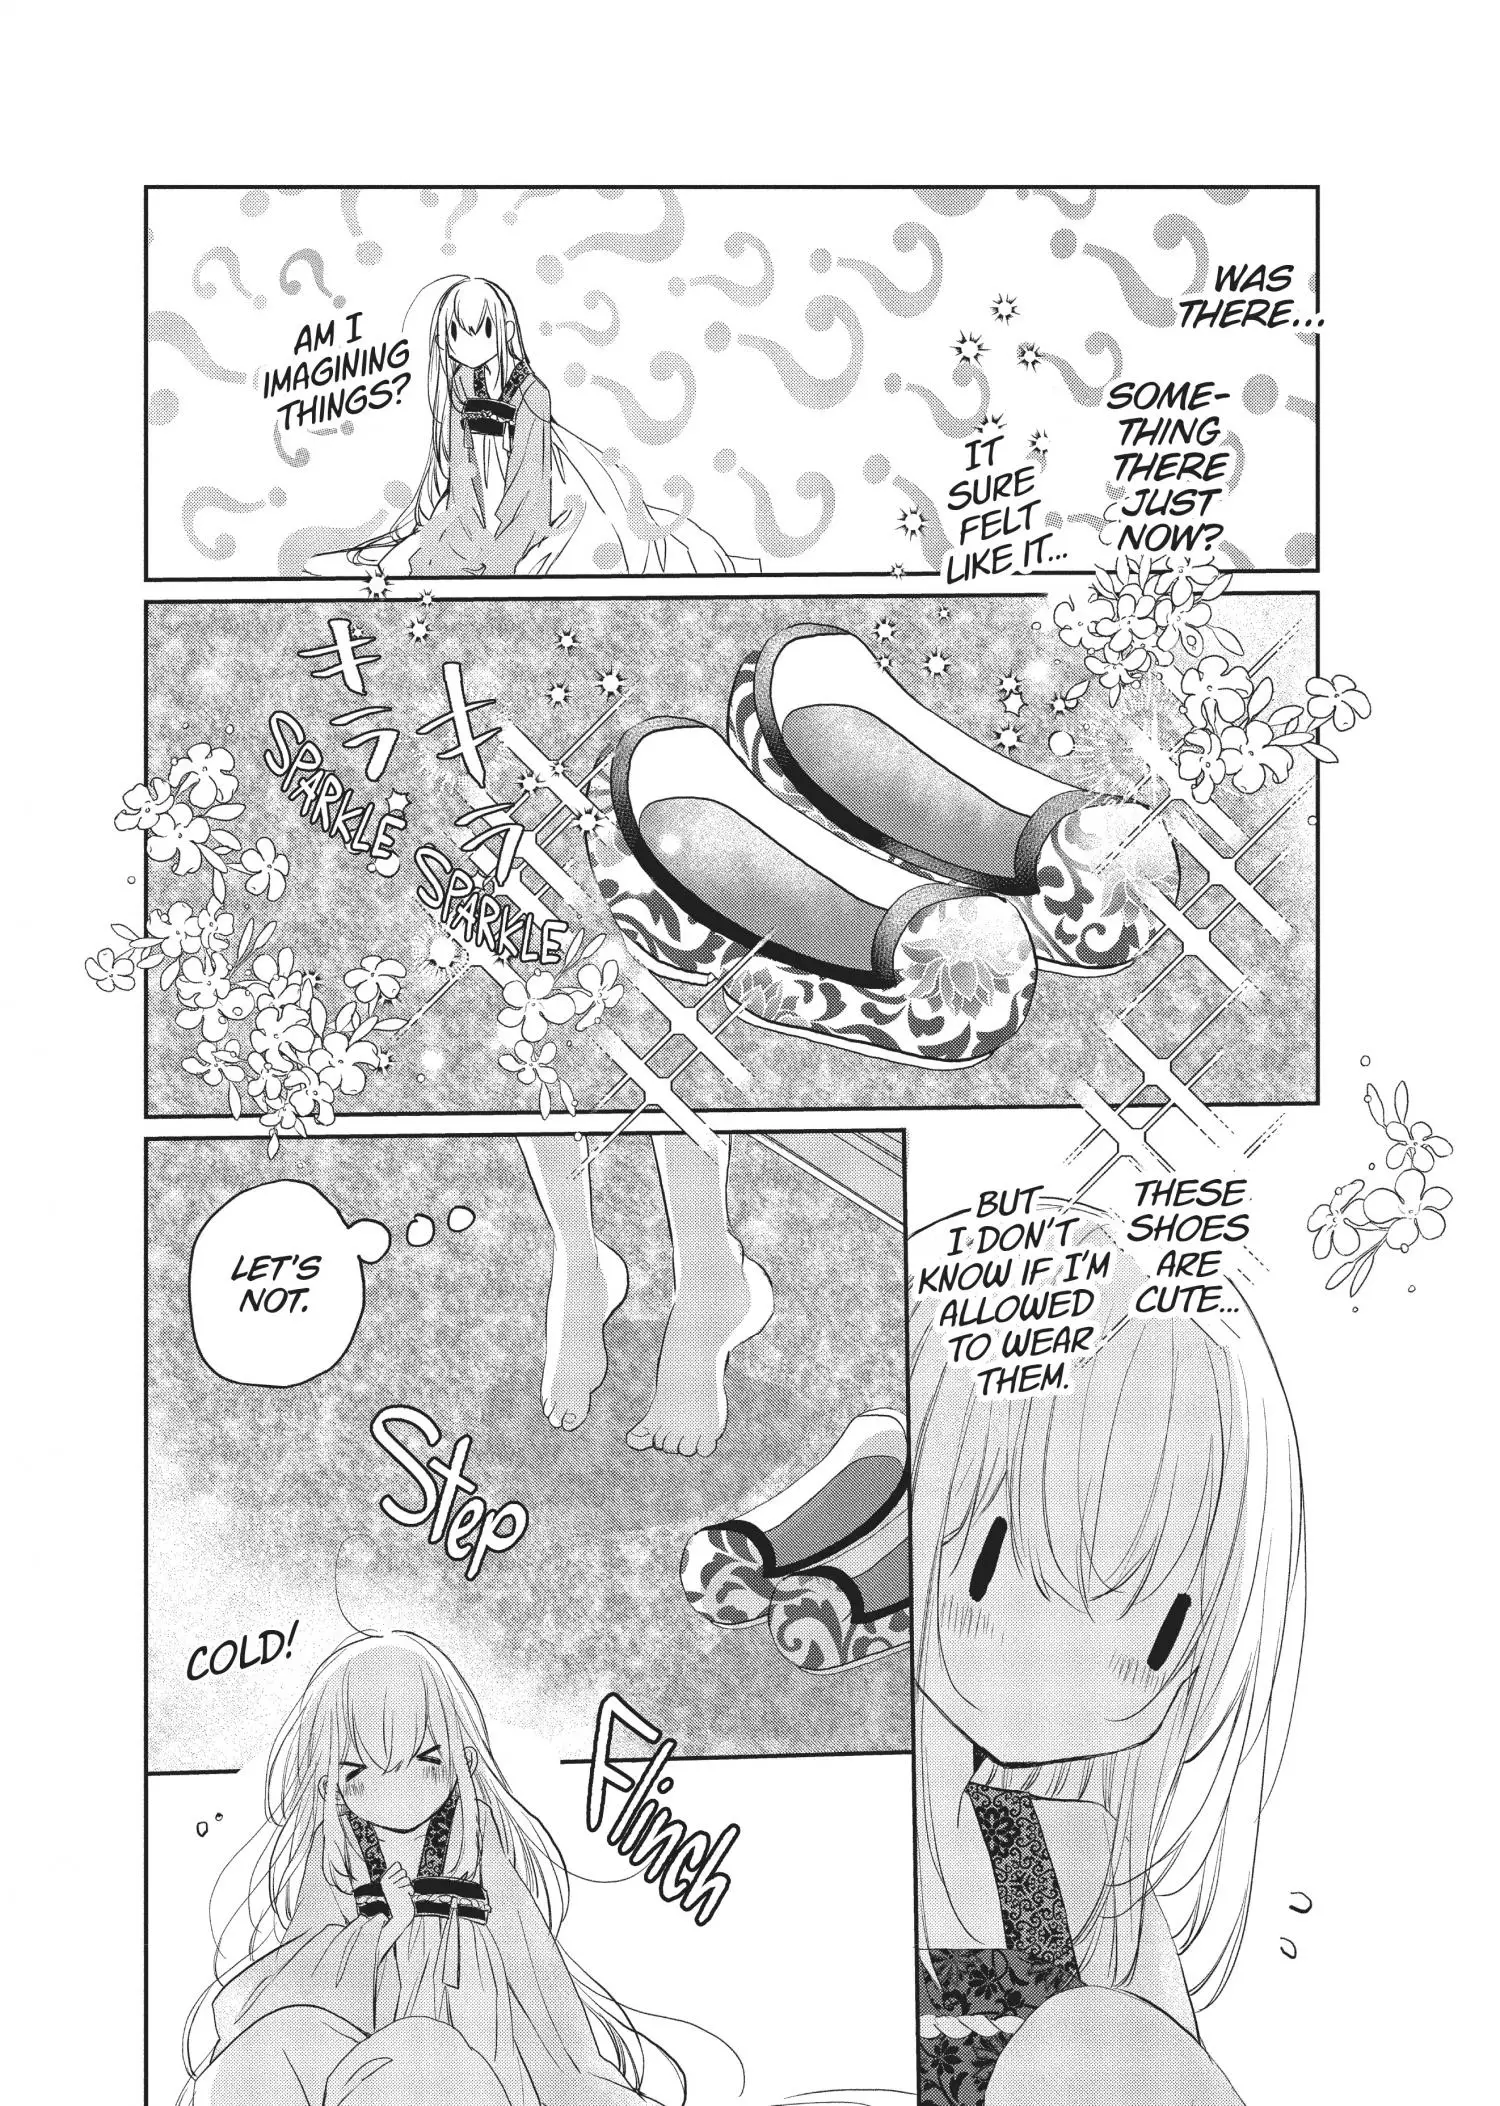 Outbride -Ikei Konin- - 16 page 5-8460c839